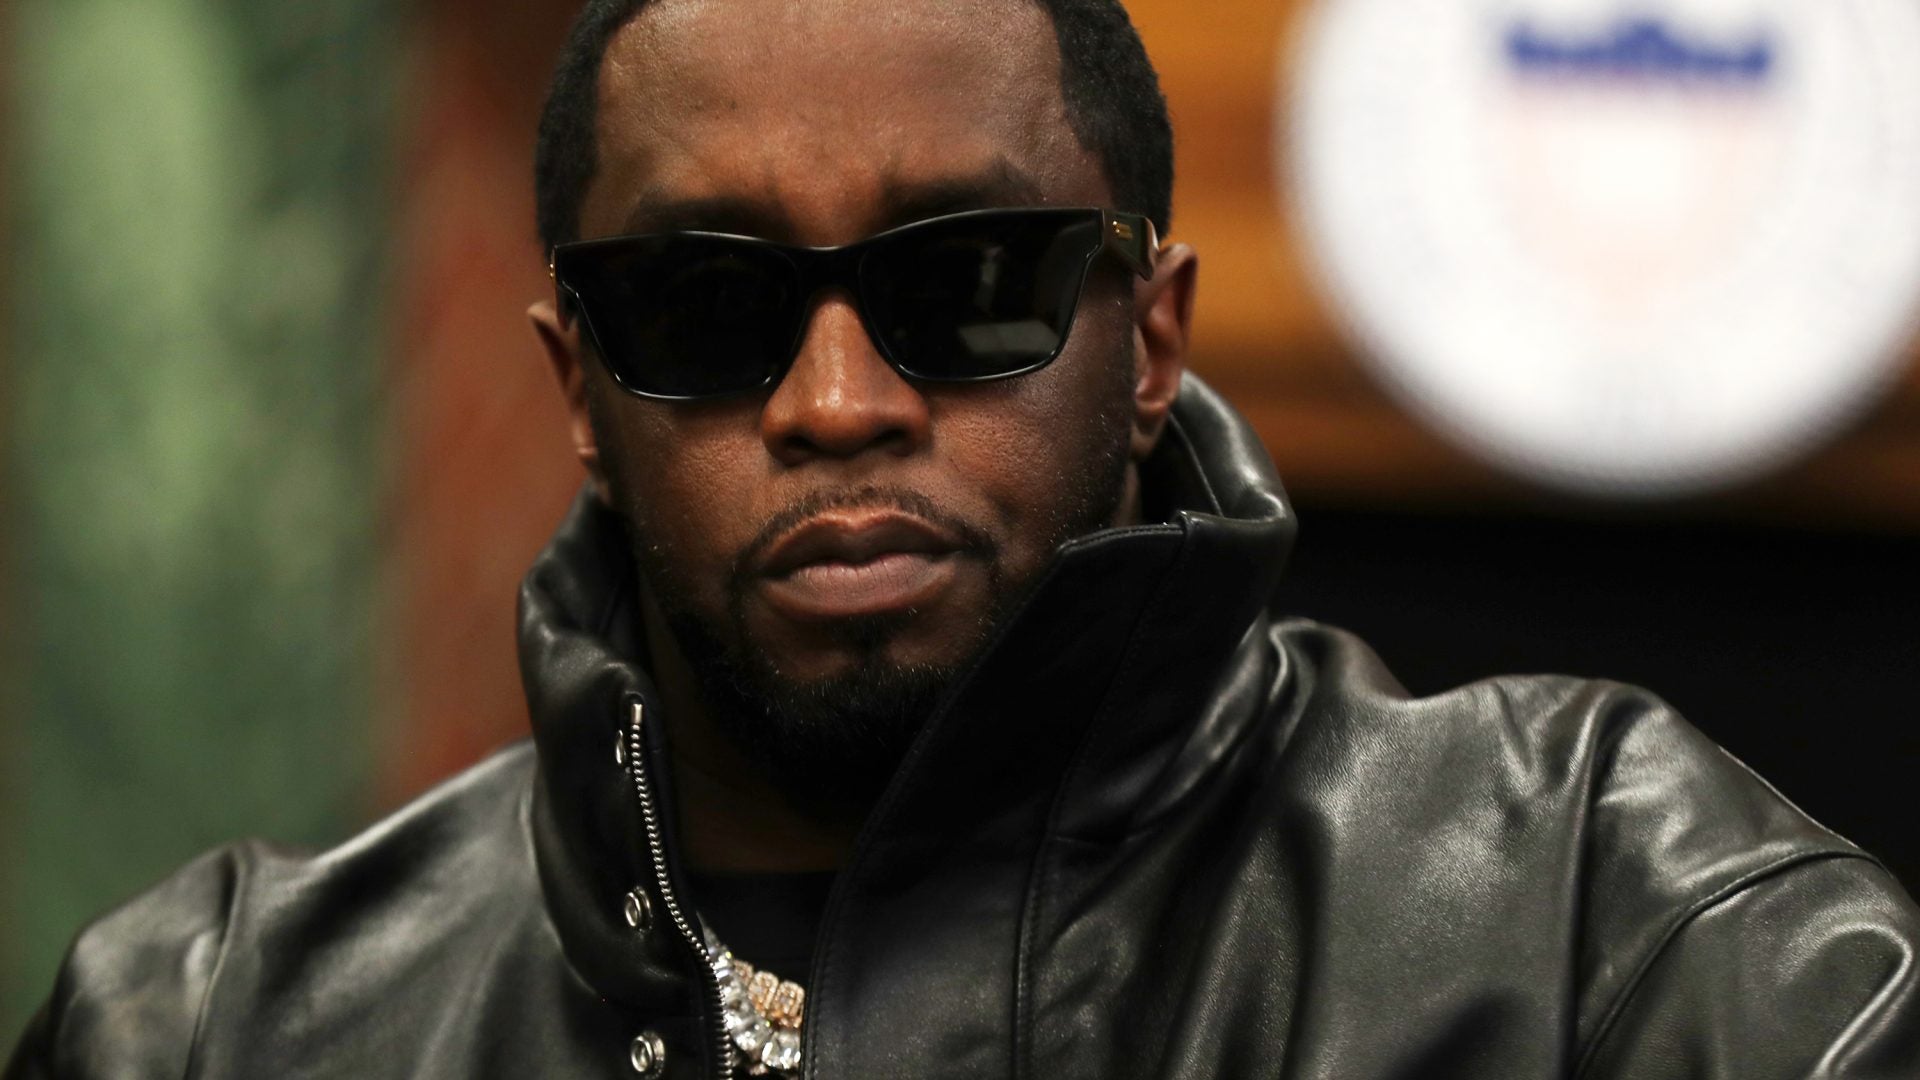 Sean ‘Diddy’ Combs Has Been Accused Of Sexual Harassment In New Lawsuit